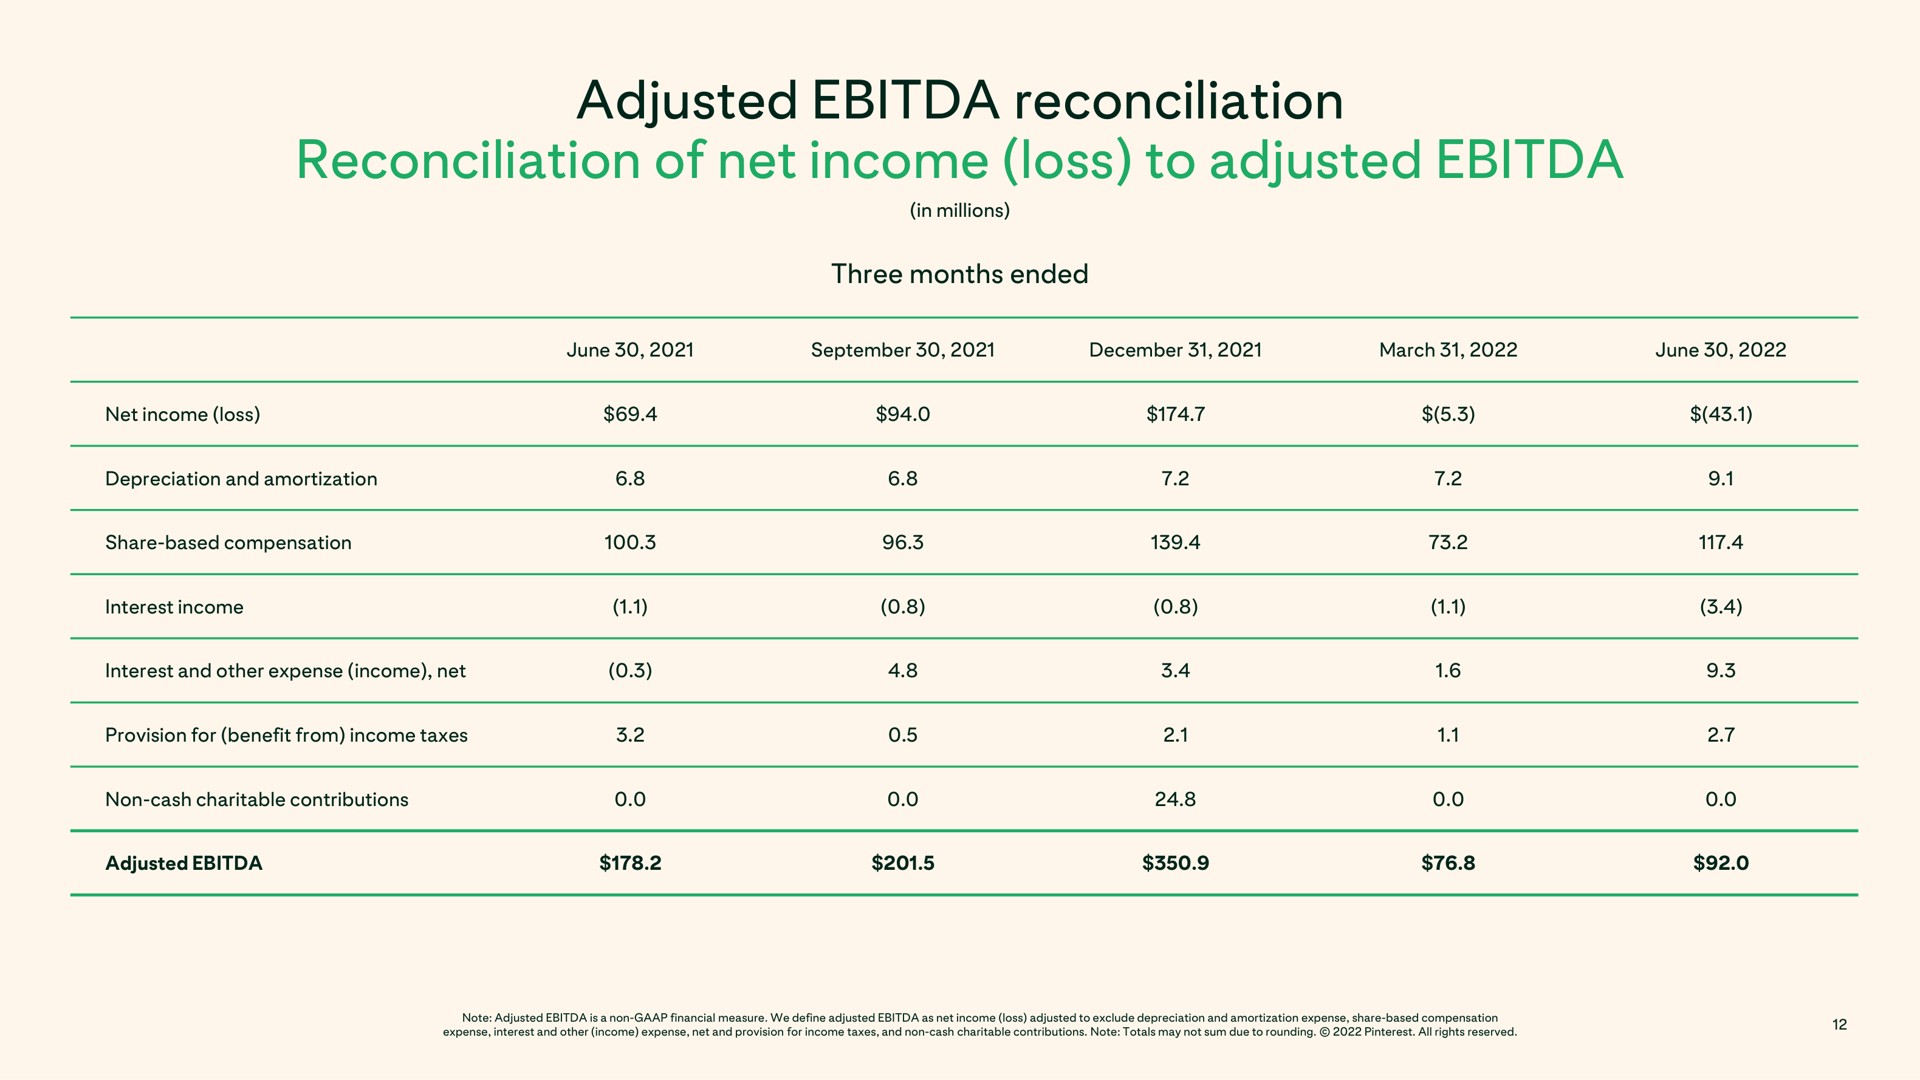 adjusted reconciliation reconciliation of net income loss to adjusted | Pinterest